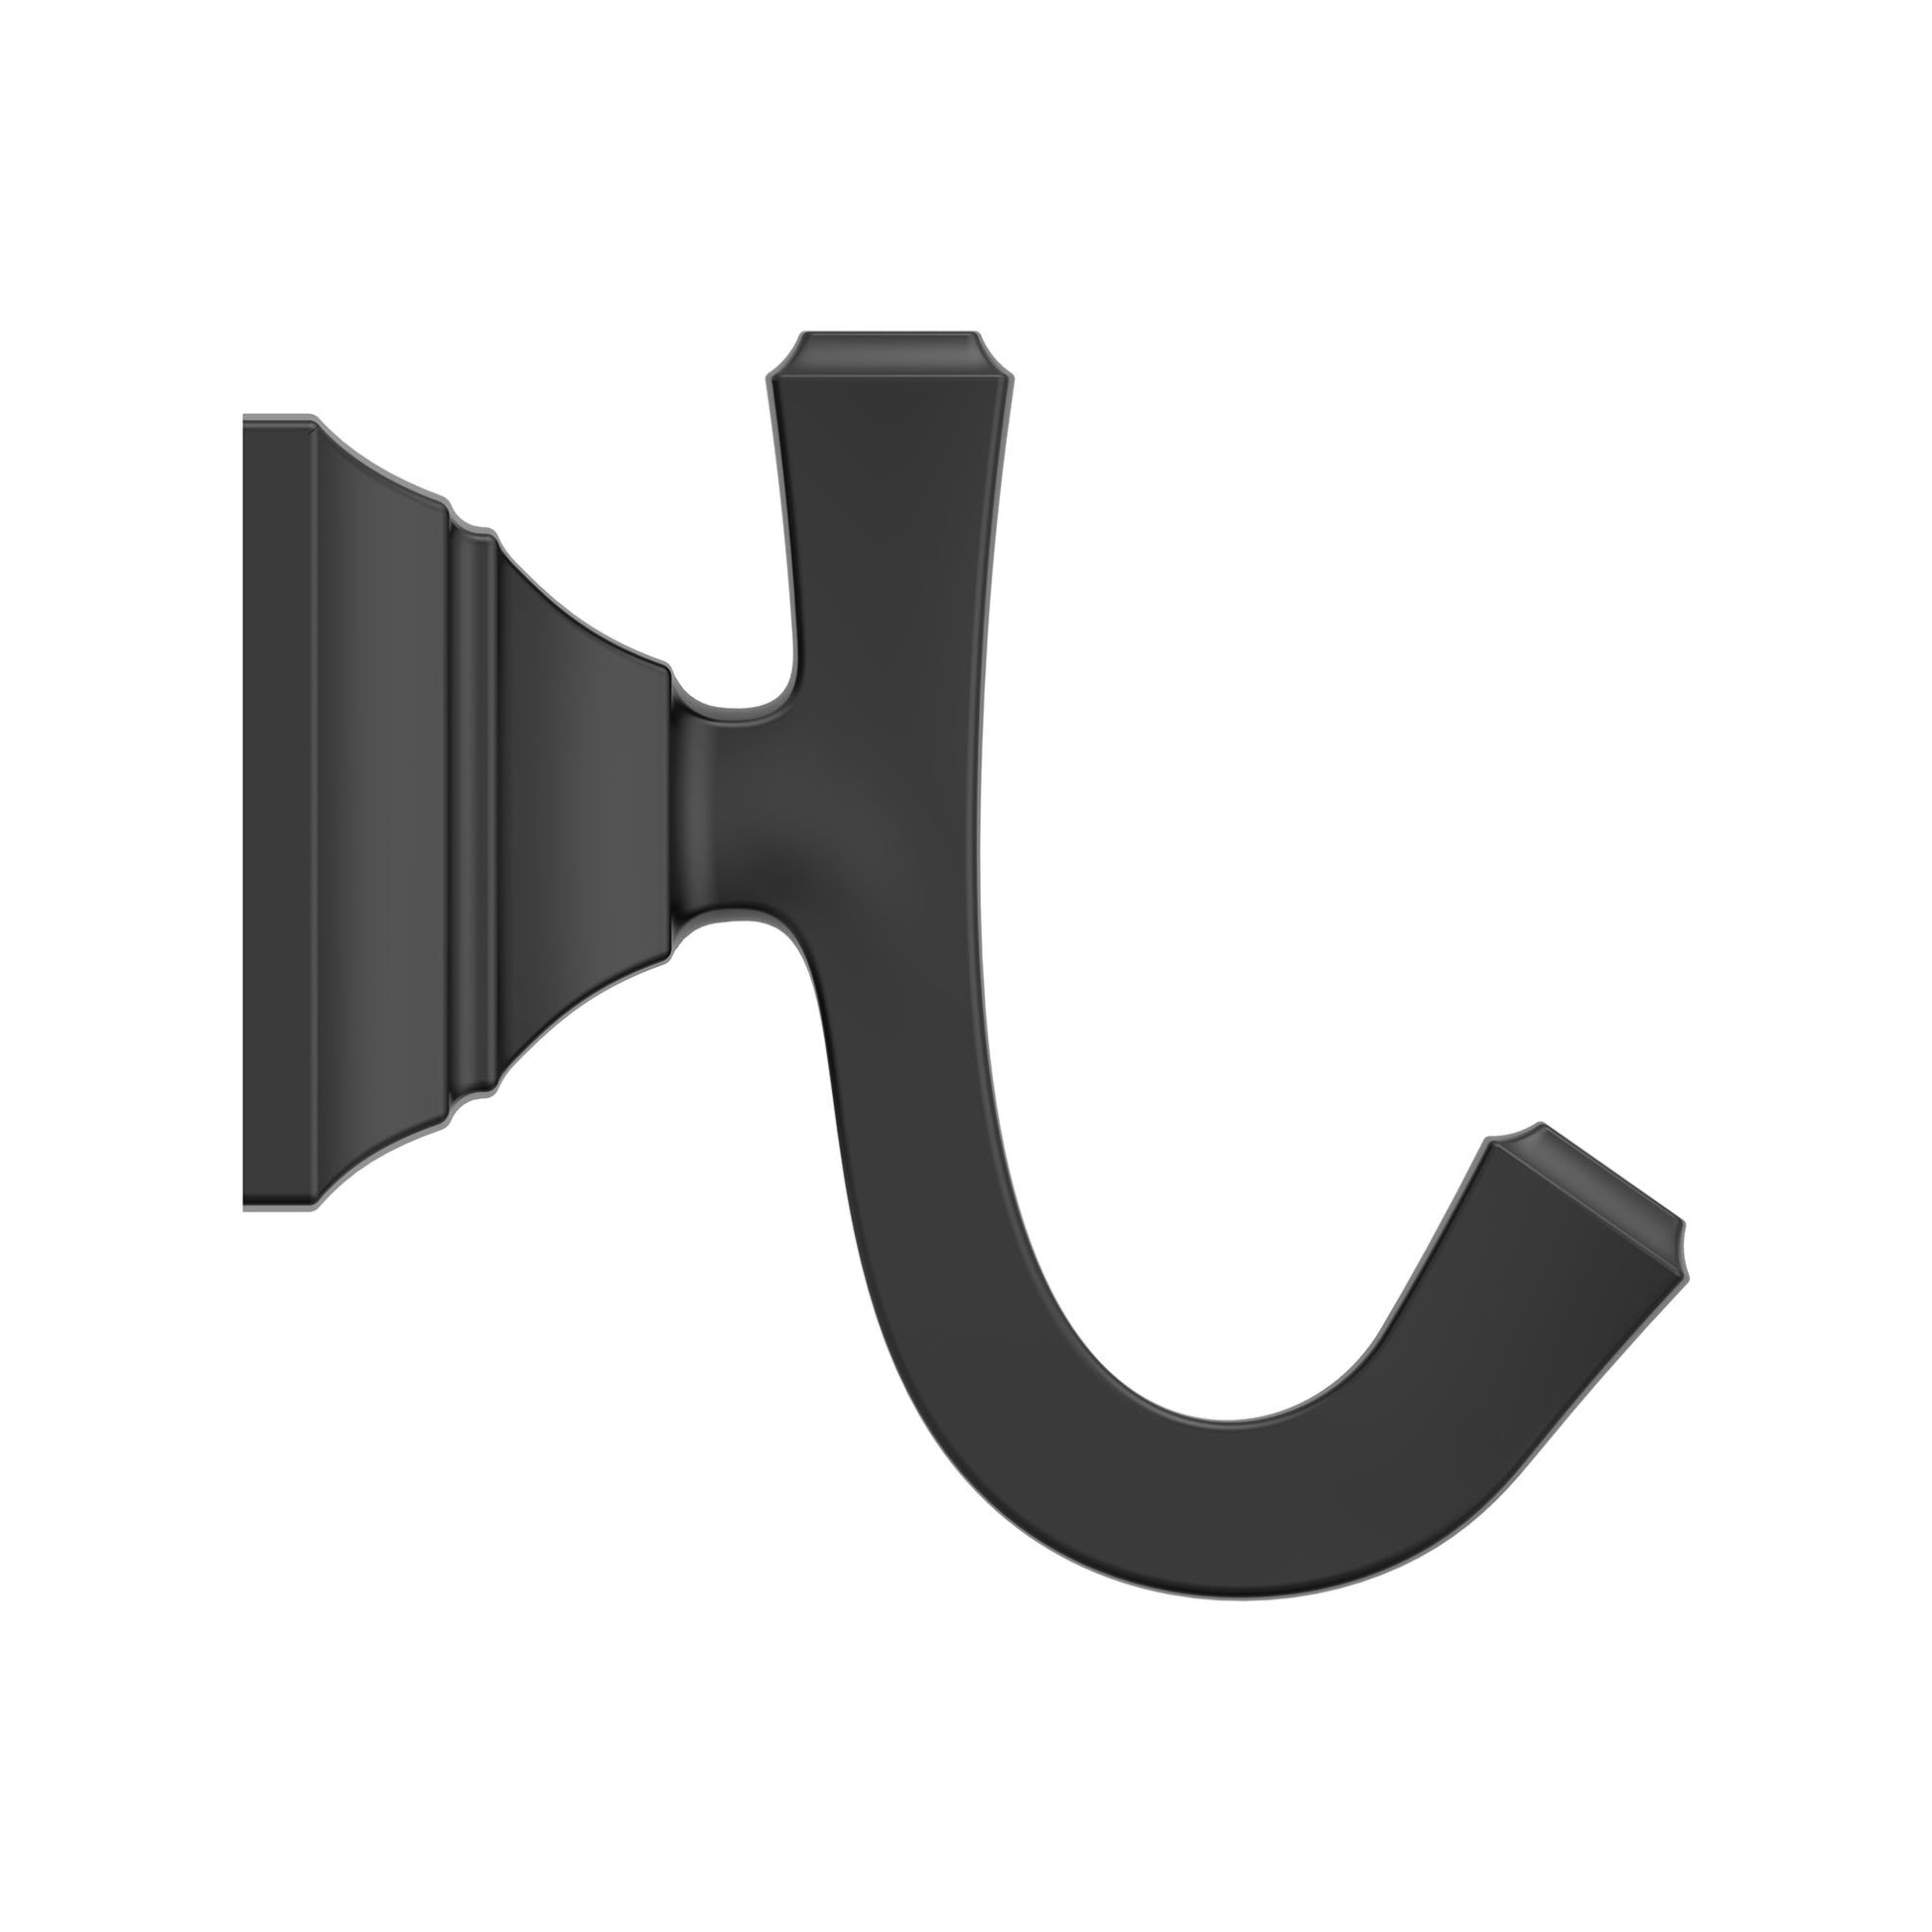 AMERICAN-STANDARD 7455210.243, Town Square S Double Robe Hook in Matte Black